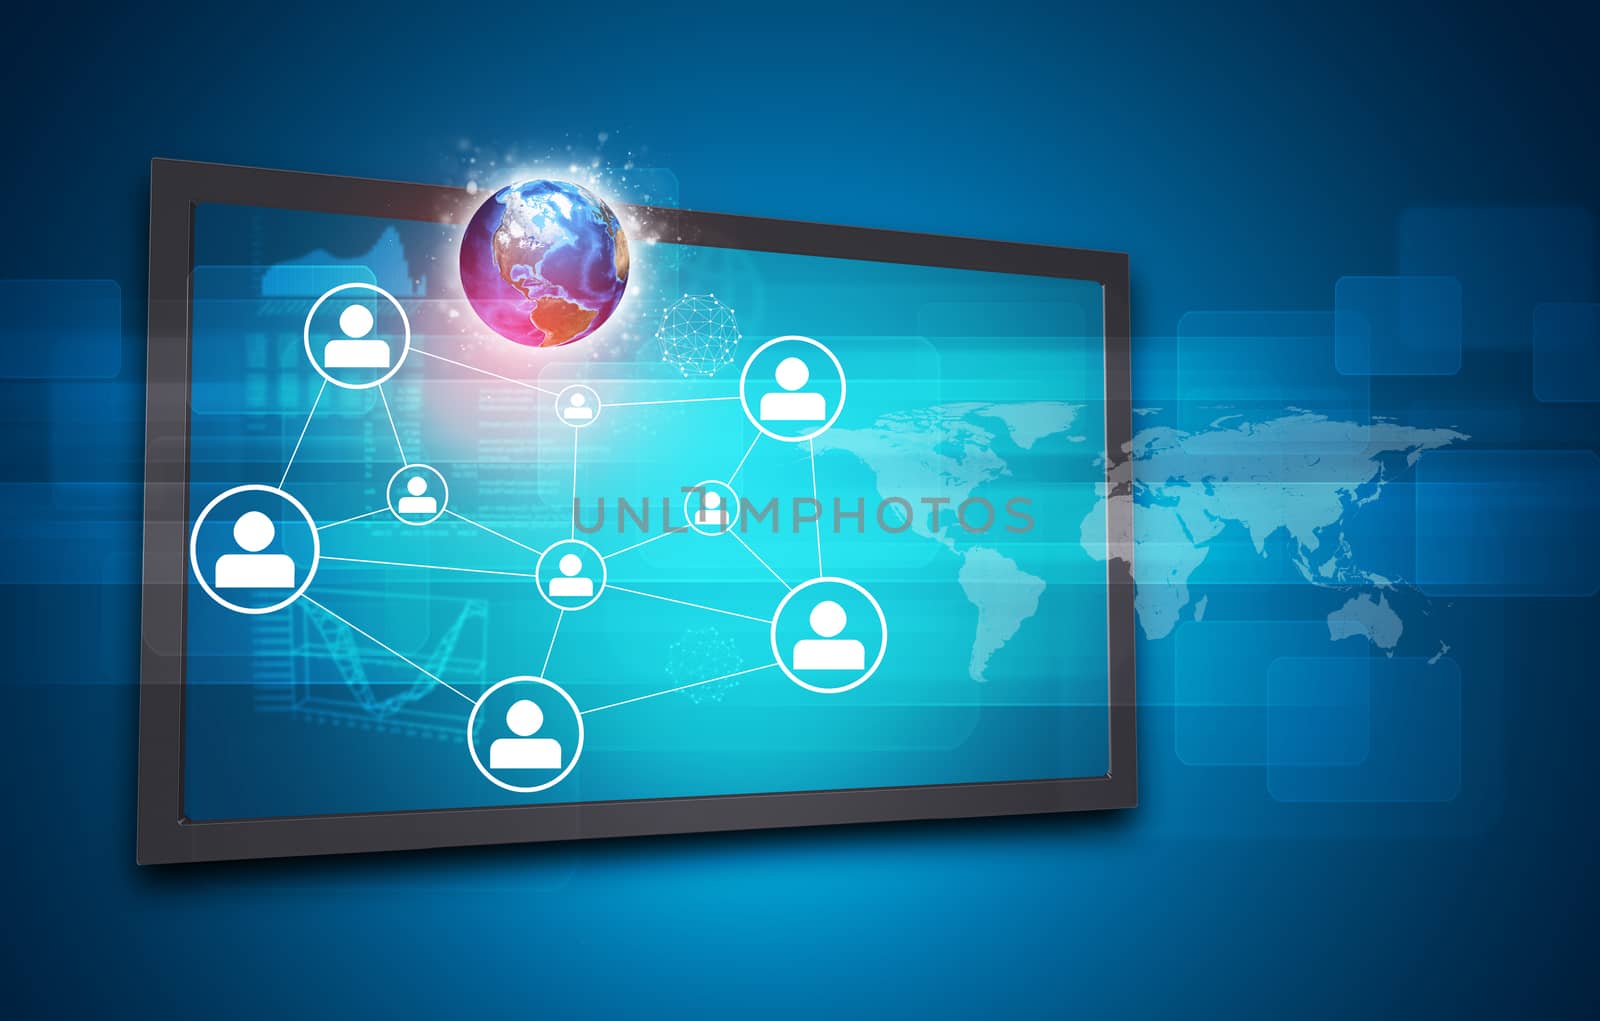 Touchscreen display with Globe, world map, network of person icons and other elements, on blue background. Element of this image furnished by NASA